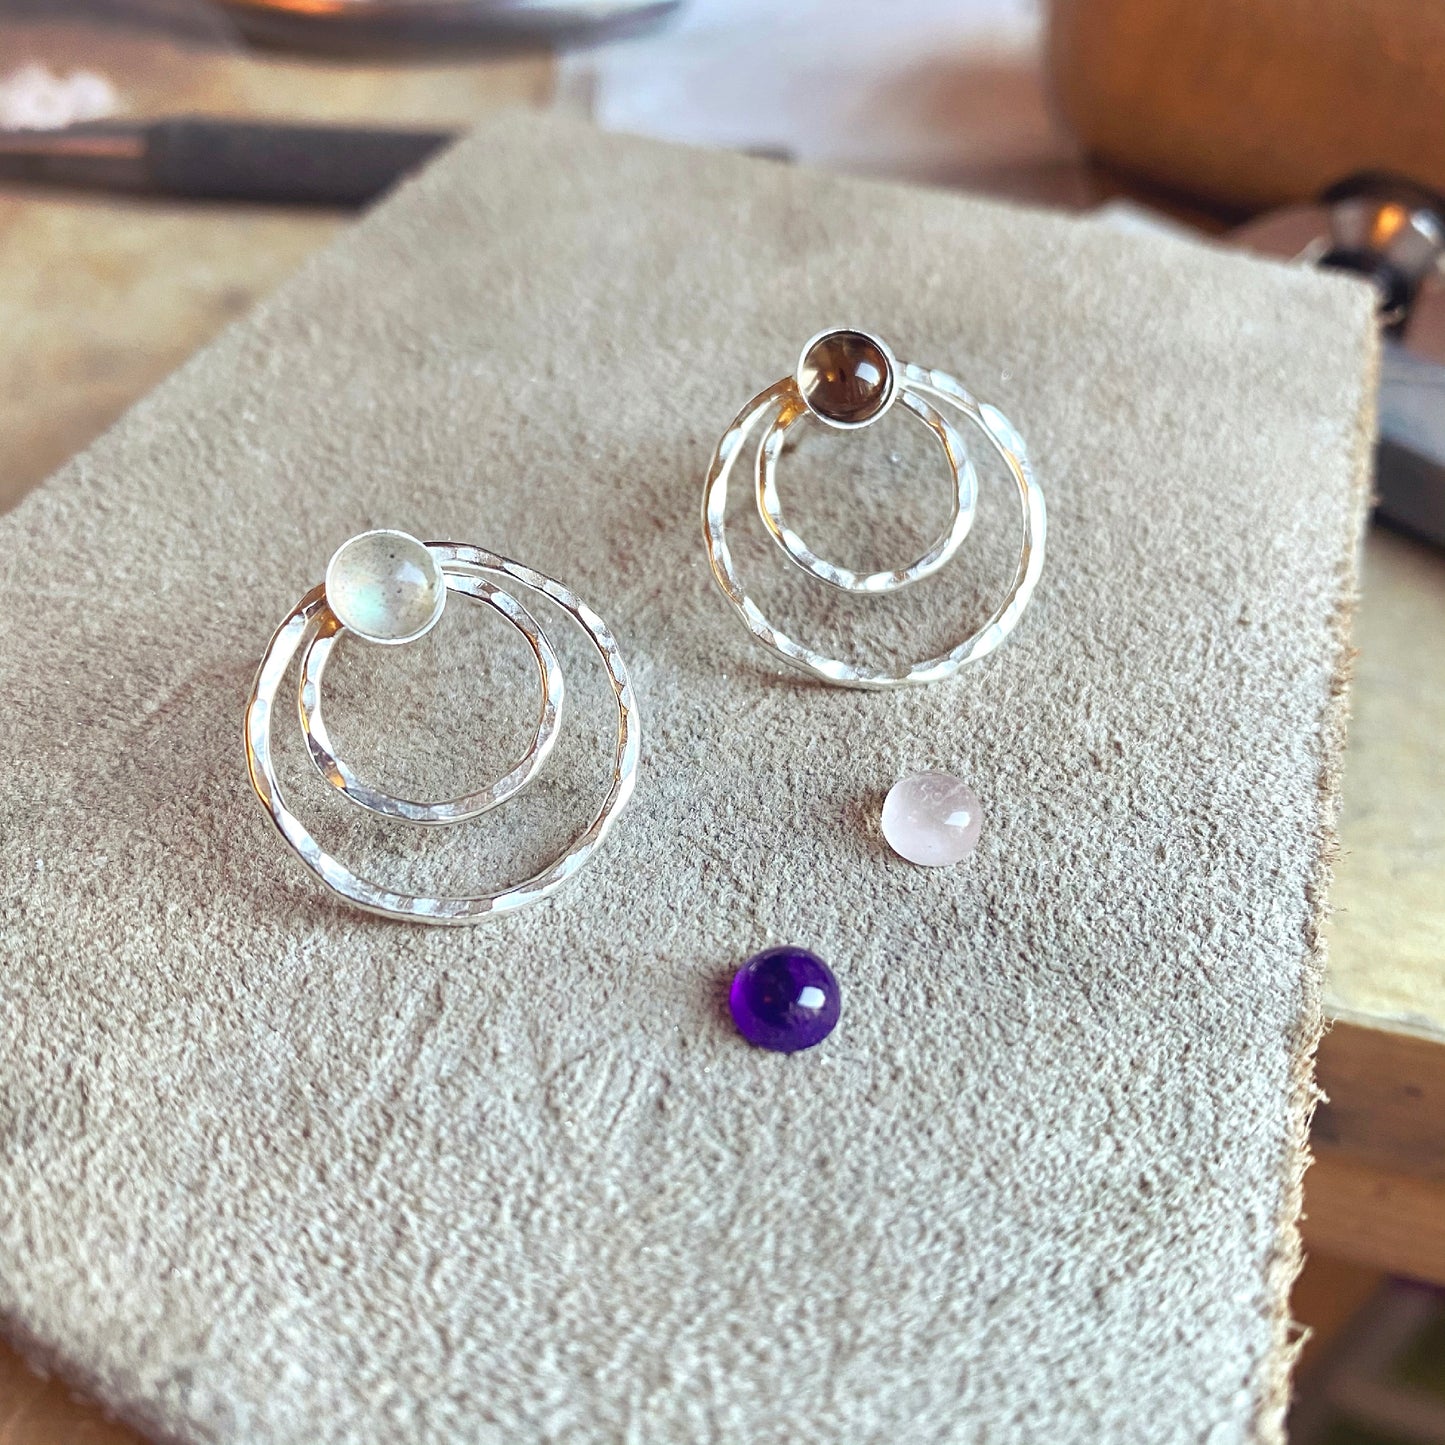 Circles and stone stud earrings